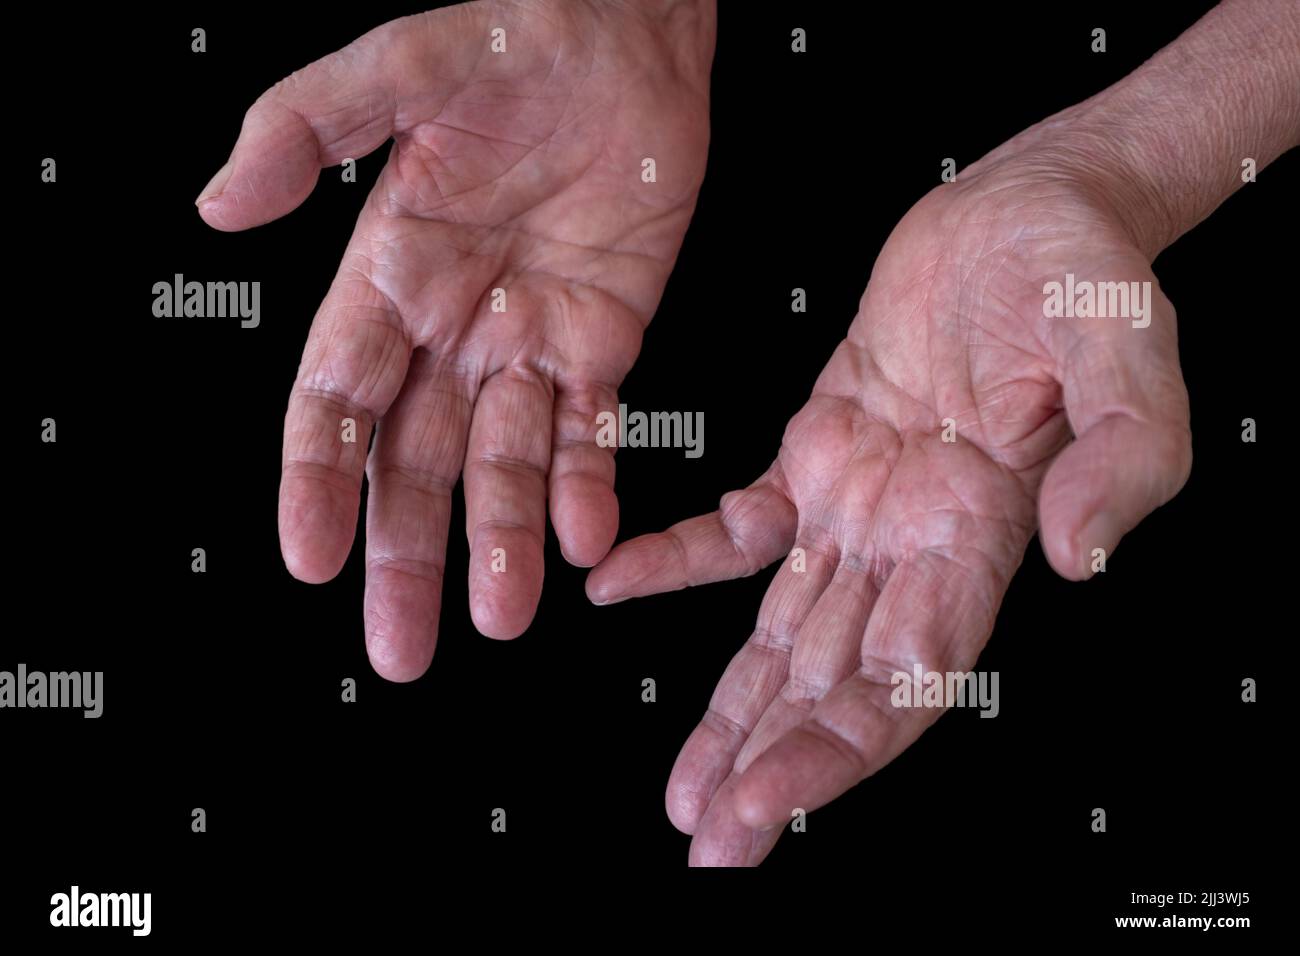 Close-up of the hands of an elderly man with CIDP (Chronic Inflammatory Demyelinating Polyneuropathy) an autoimmune disease of the nervous system. Stock Photo